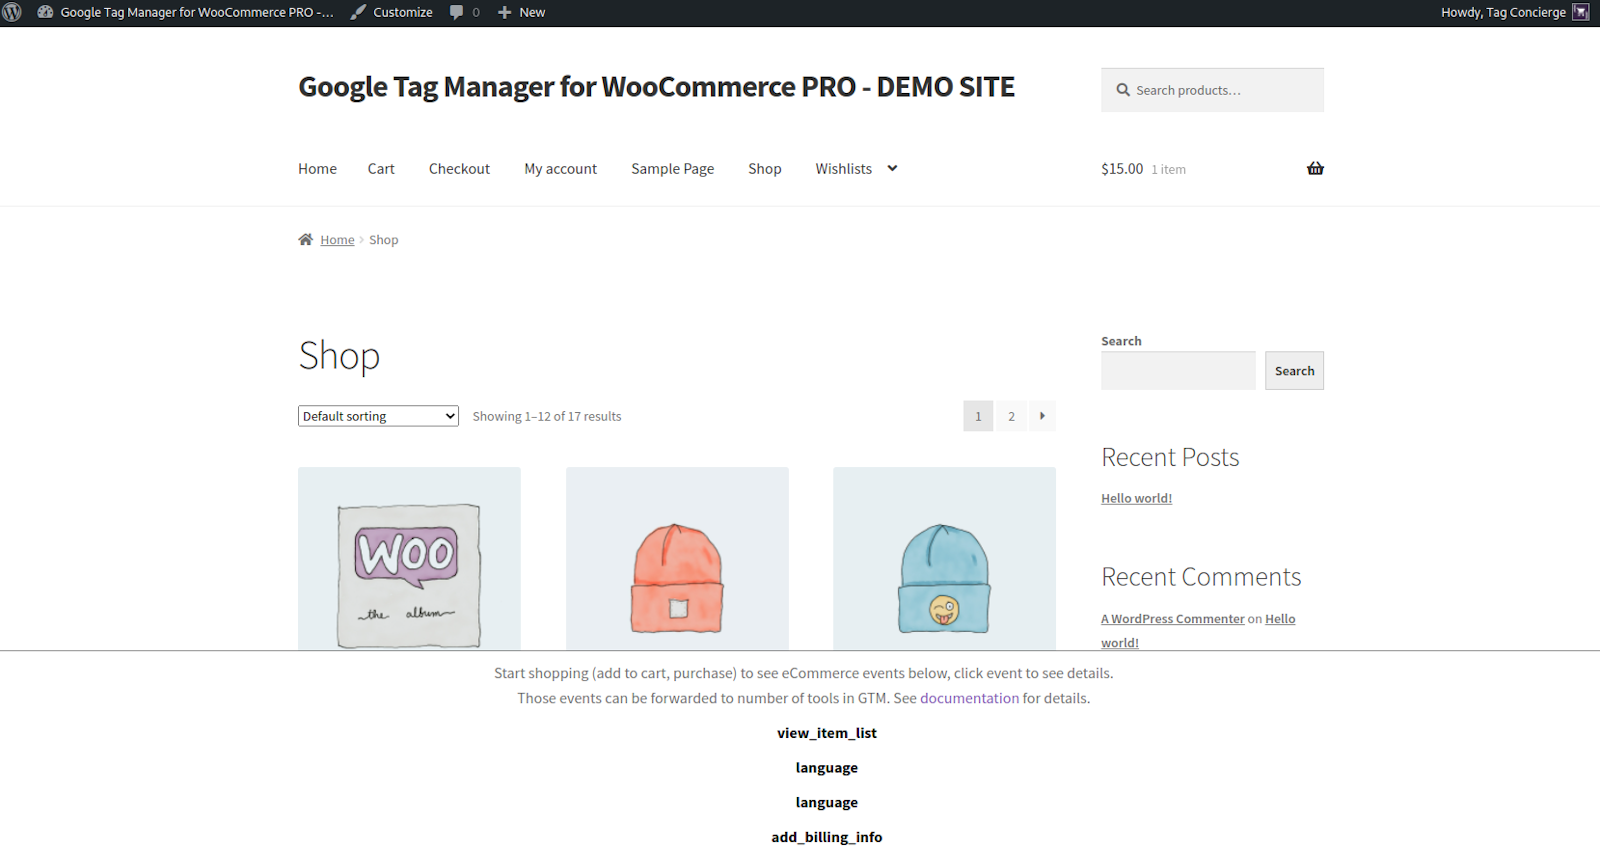 Google Tag Manager for WooCommerce PRO demo site